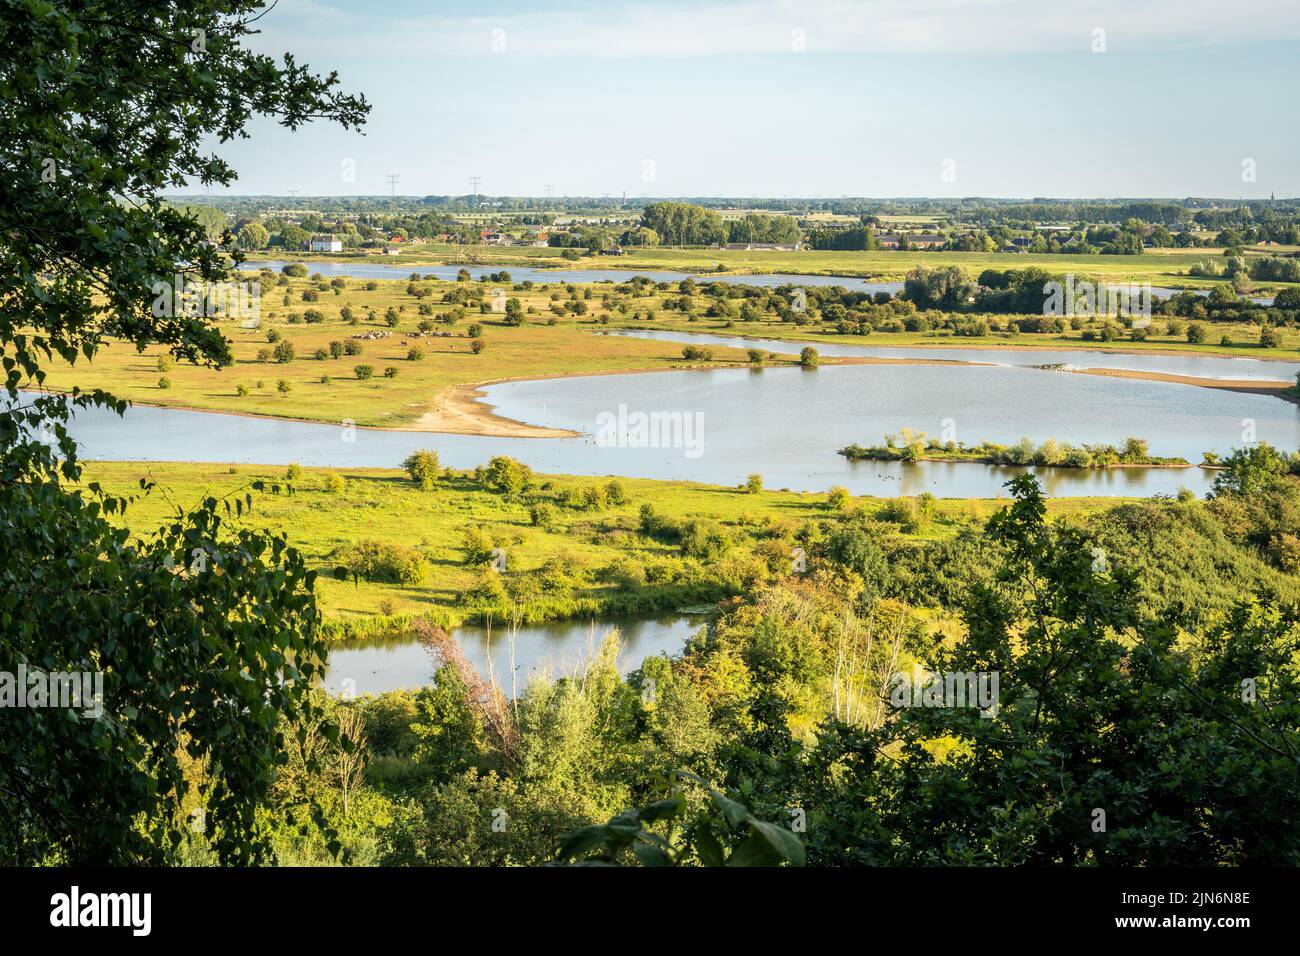 Blauwe Kamer nature reserve nearby the city of Rhenen, as seen from the Grebbeberg observation deck Stock Photo